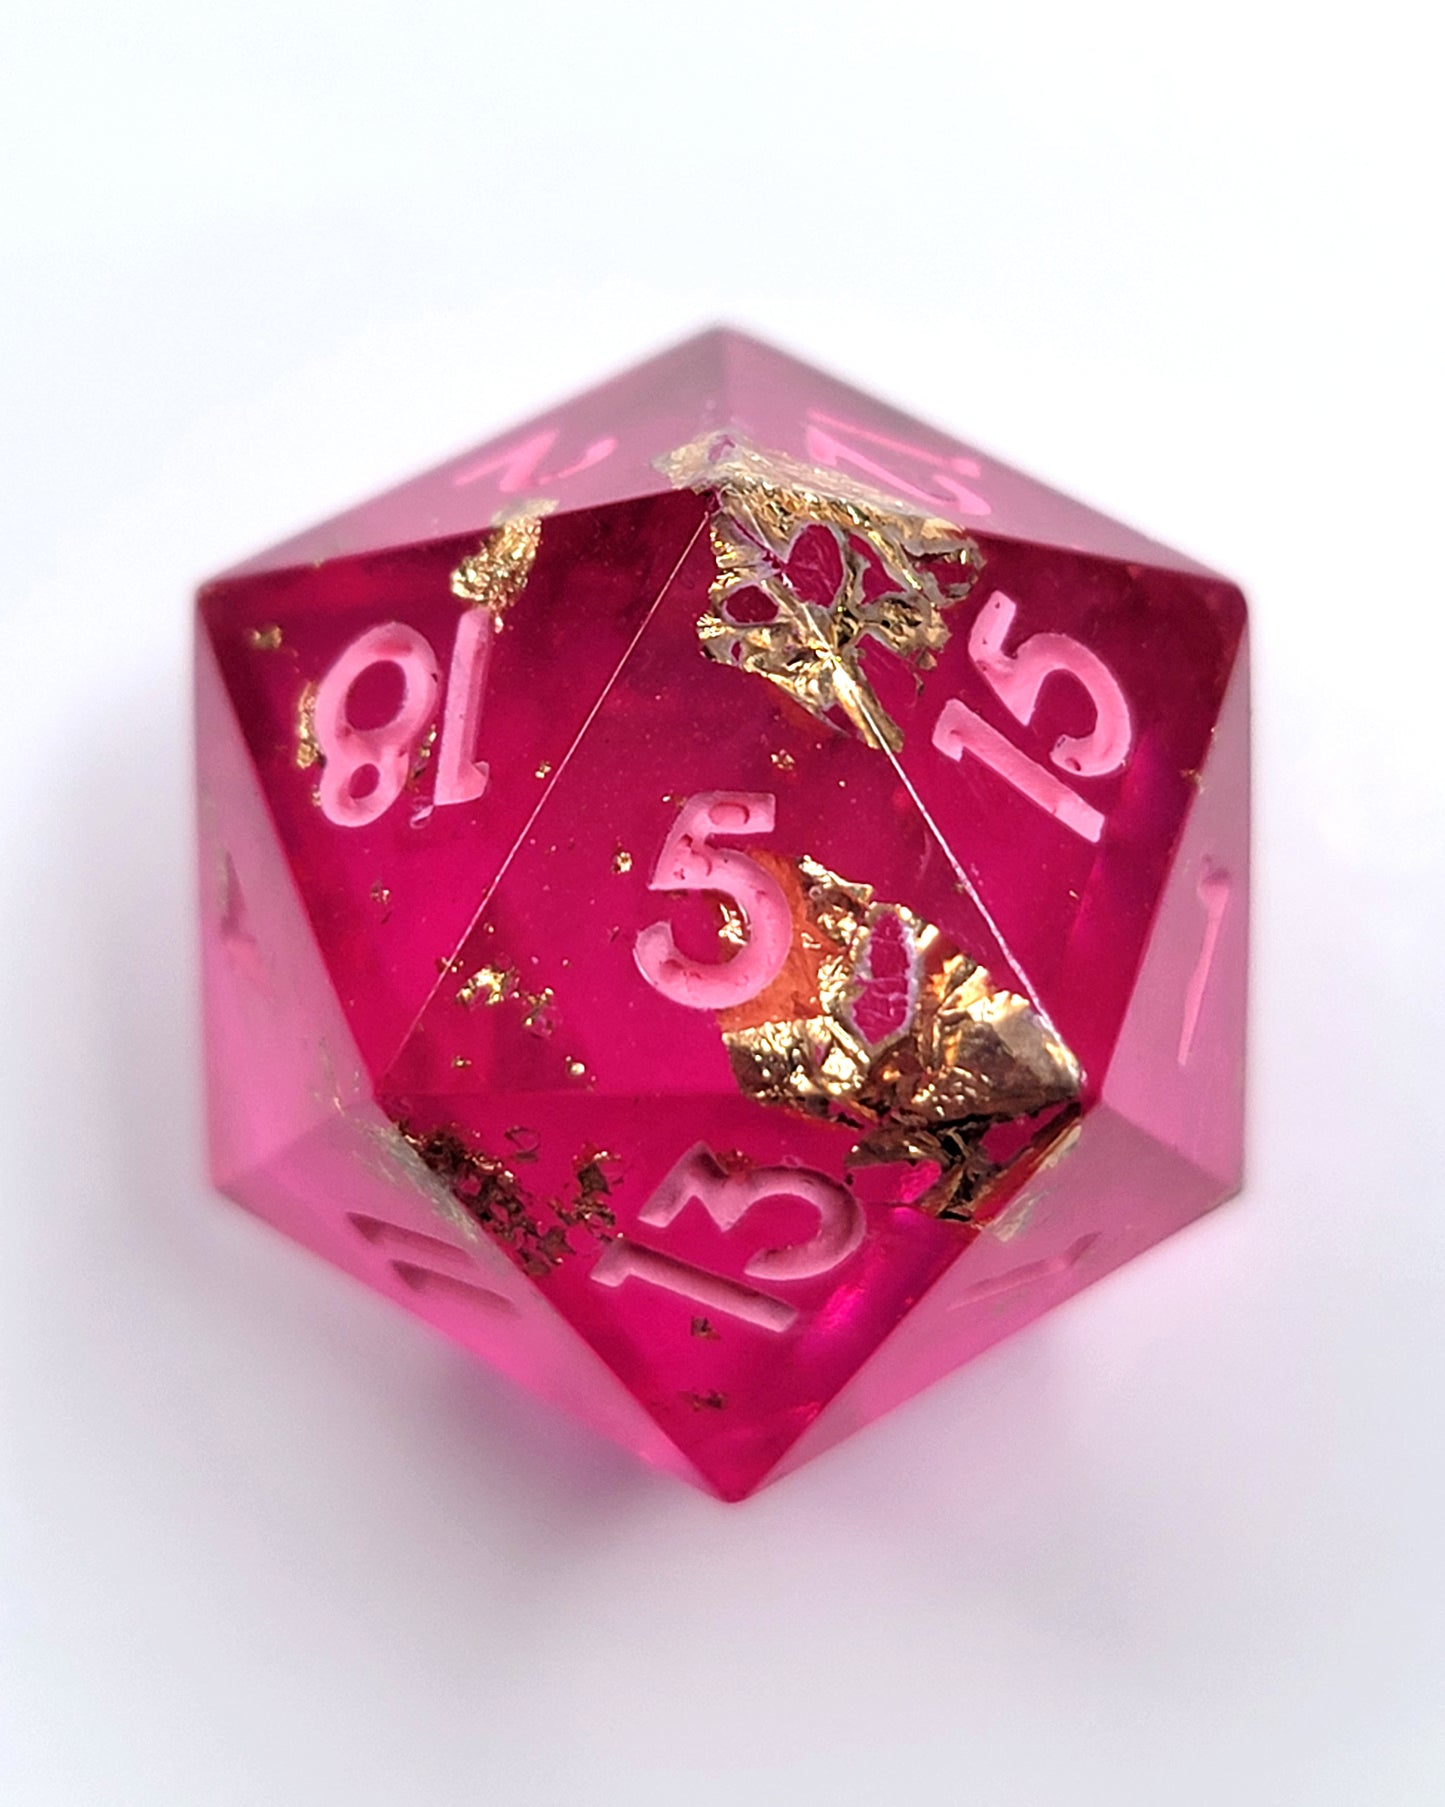 Princess -1 D20 | Handmade Dice | Hand Crafted Dungeons and Dragons Dice